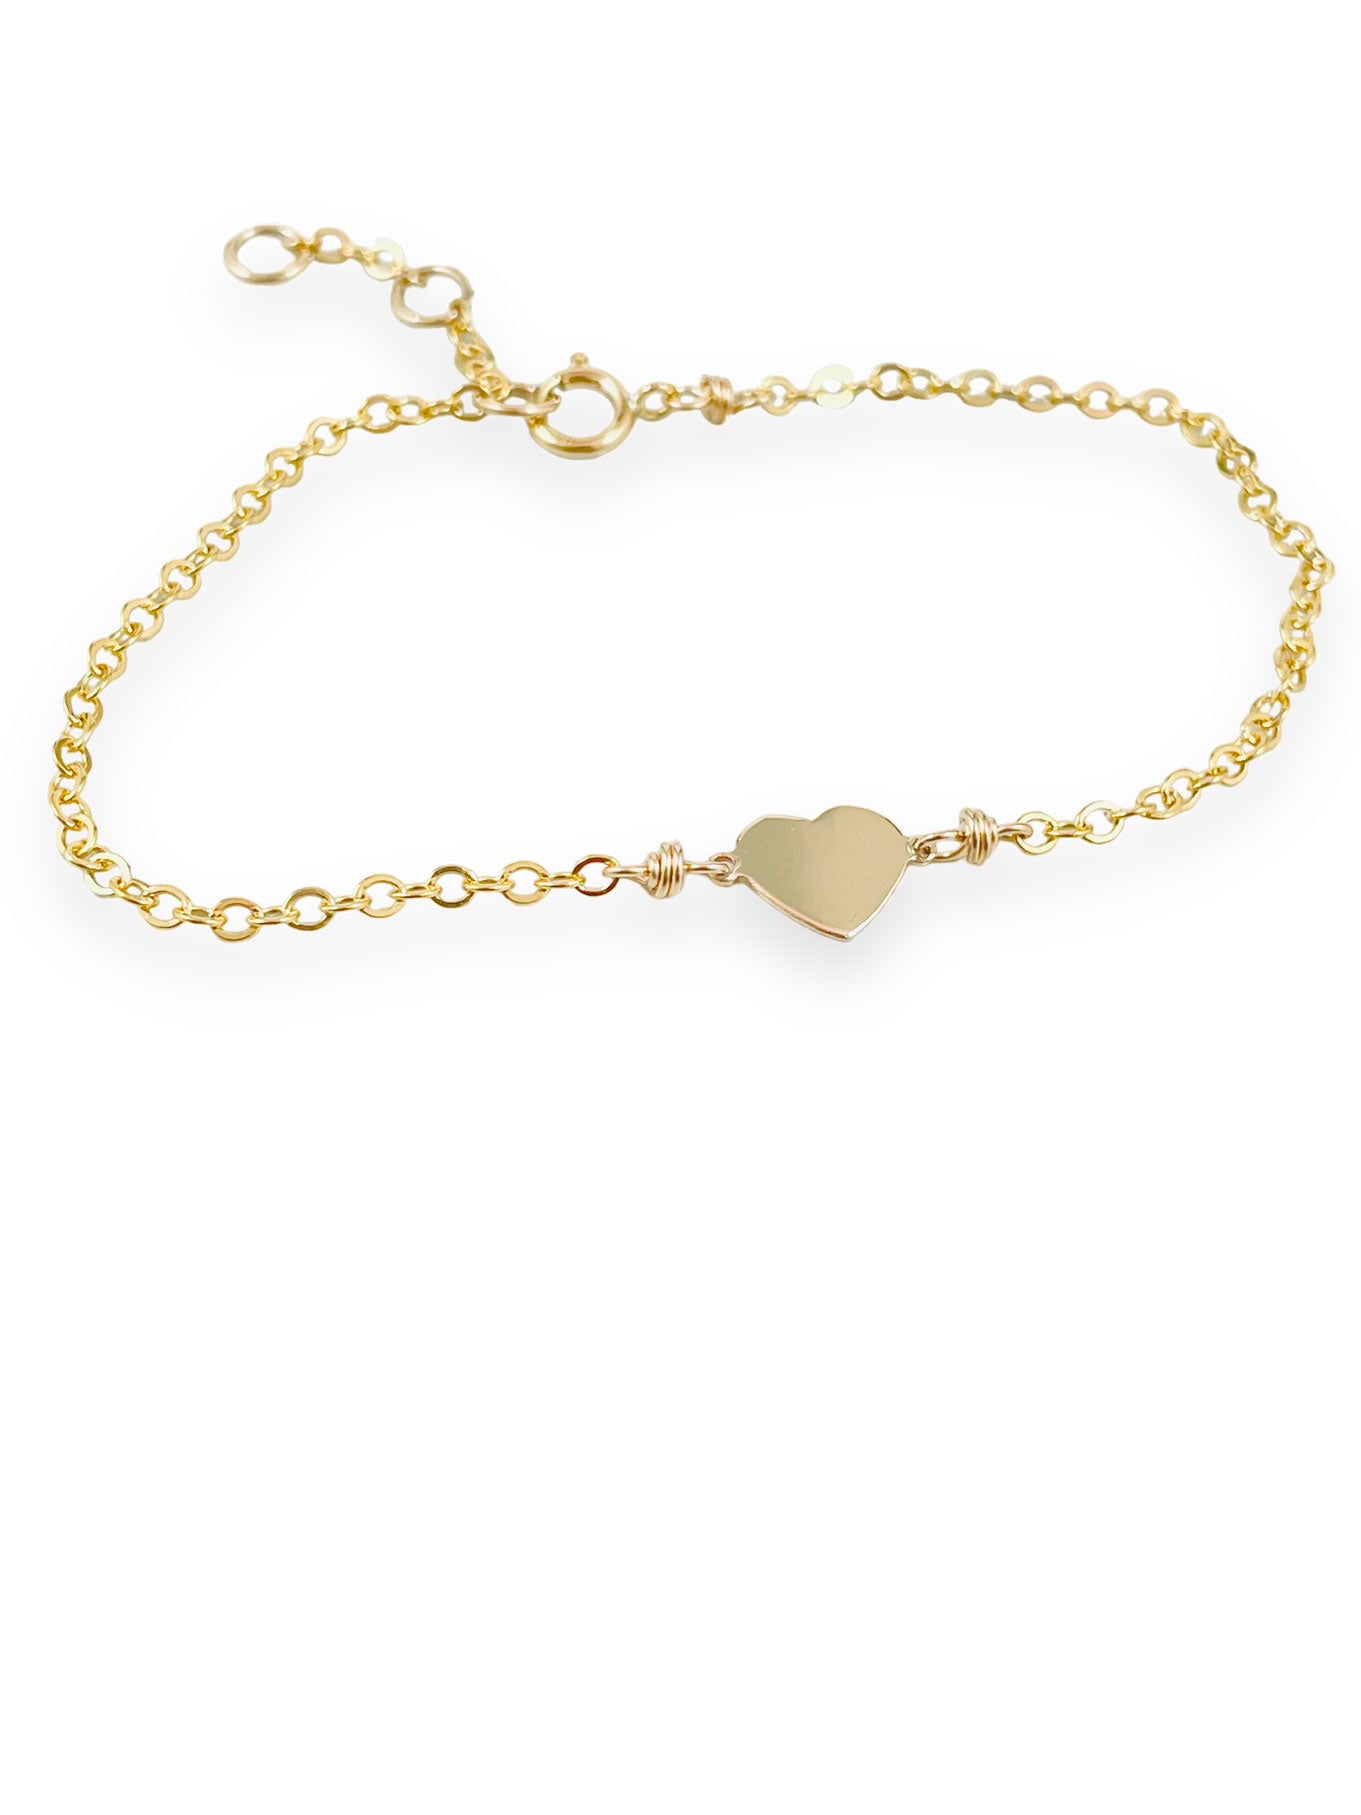 Heart Chain Bracelet: A Timeless Symbol of Love and Elegance